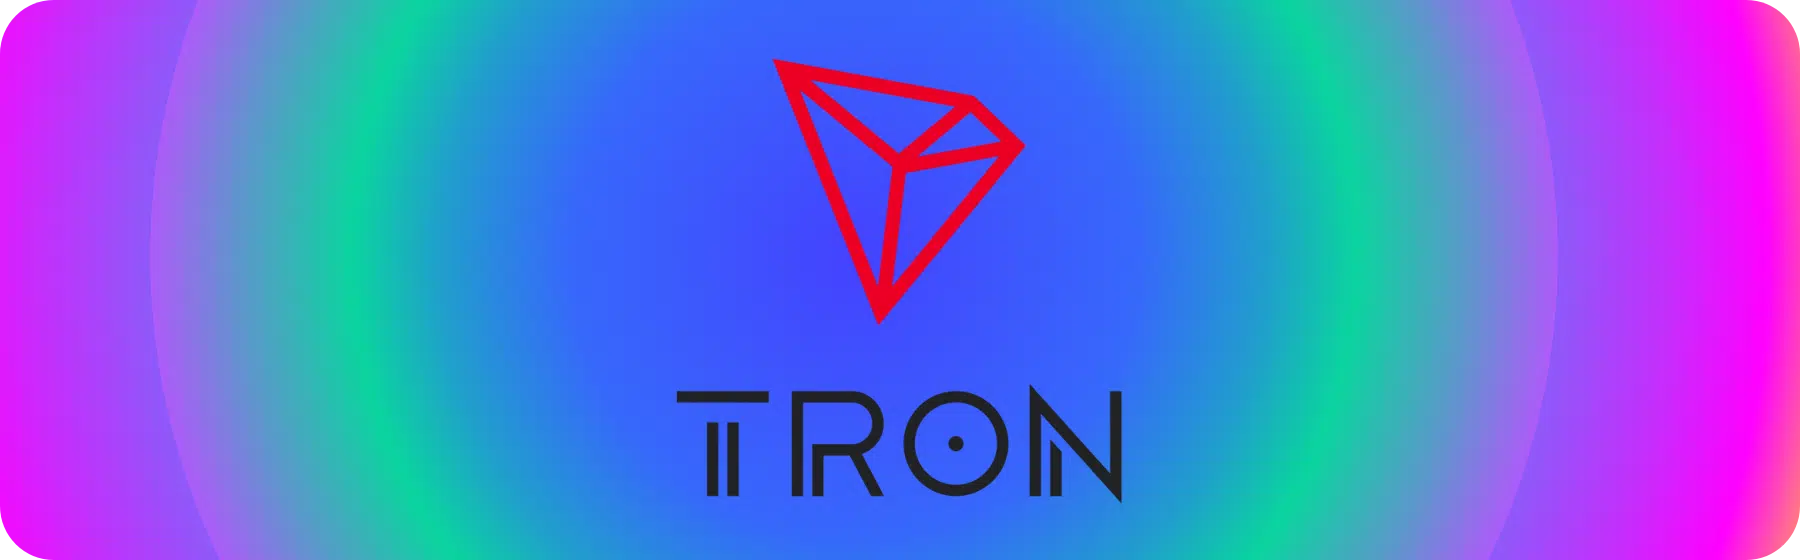 tron payment method picture with logo